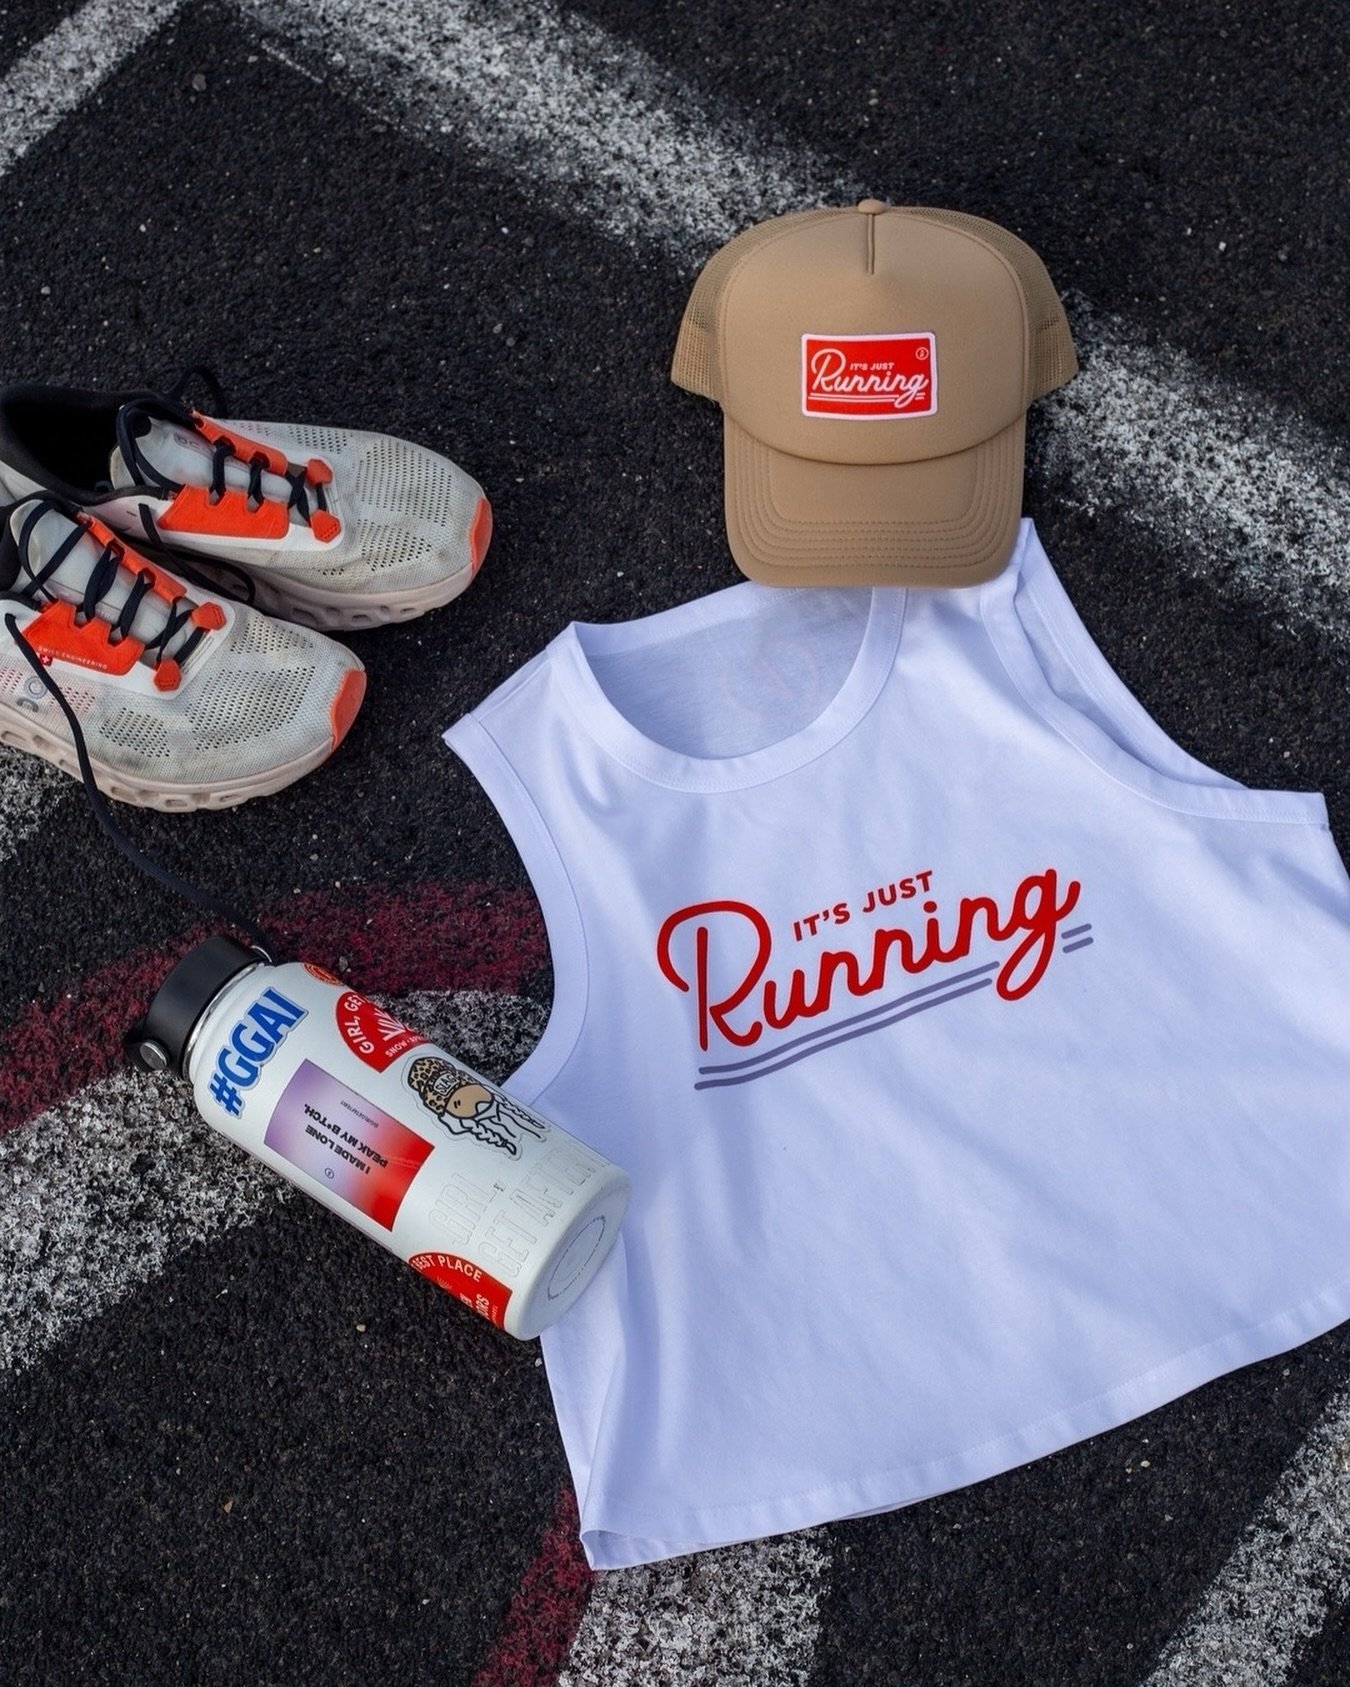 MINI-DROP 💥
Shop our retro-inspired collection of hats and tanks to hit the trail, pound the pavement and remember that running really is just for the fun of it.
⠀⠀⠀⠀⠀⠀⠀⠀⠀
@on shoes not included. While supplies last 👟
.
#GIRLGETAFTERIT #runnergirl 